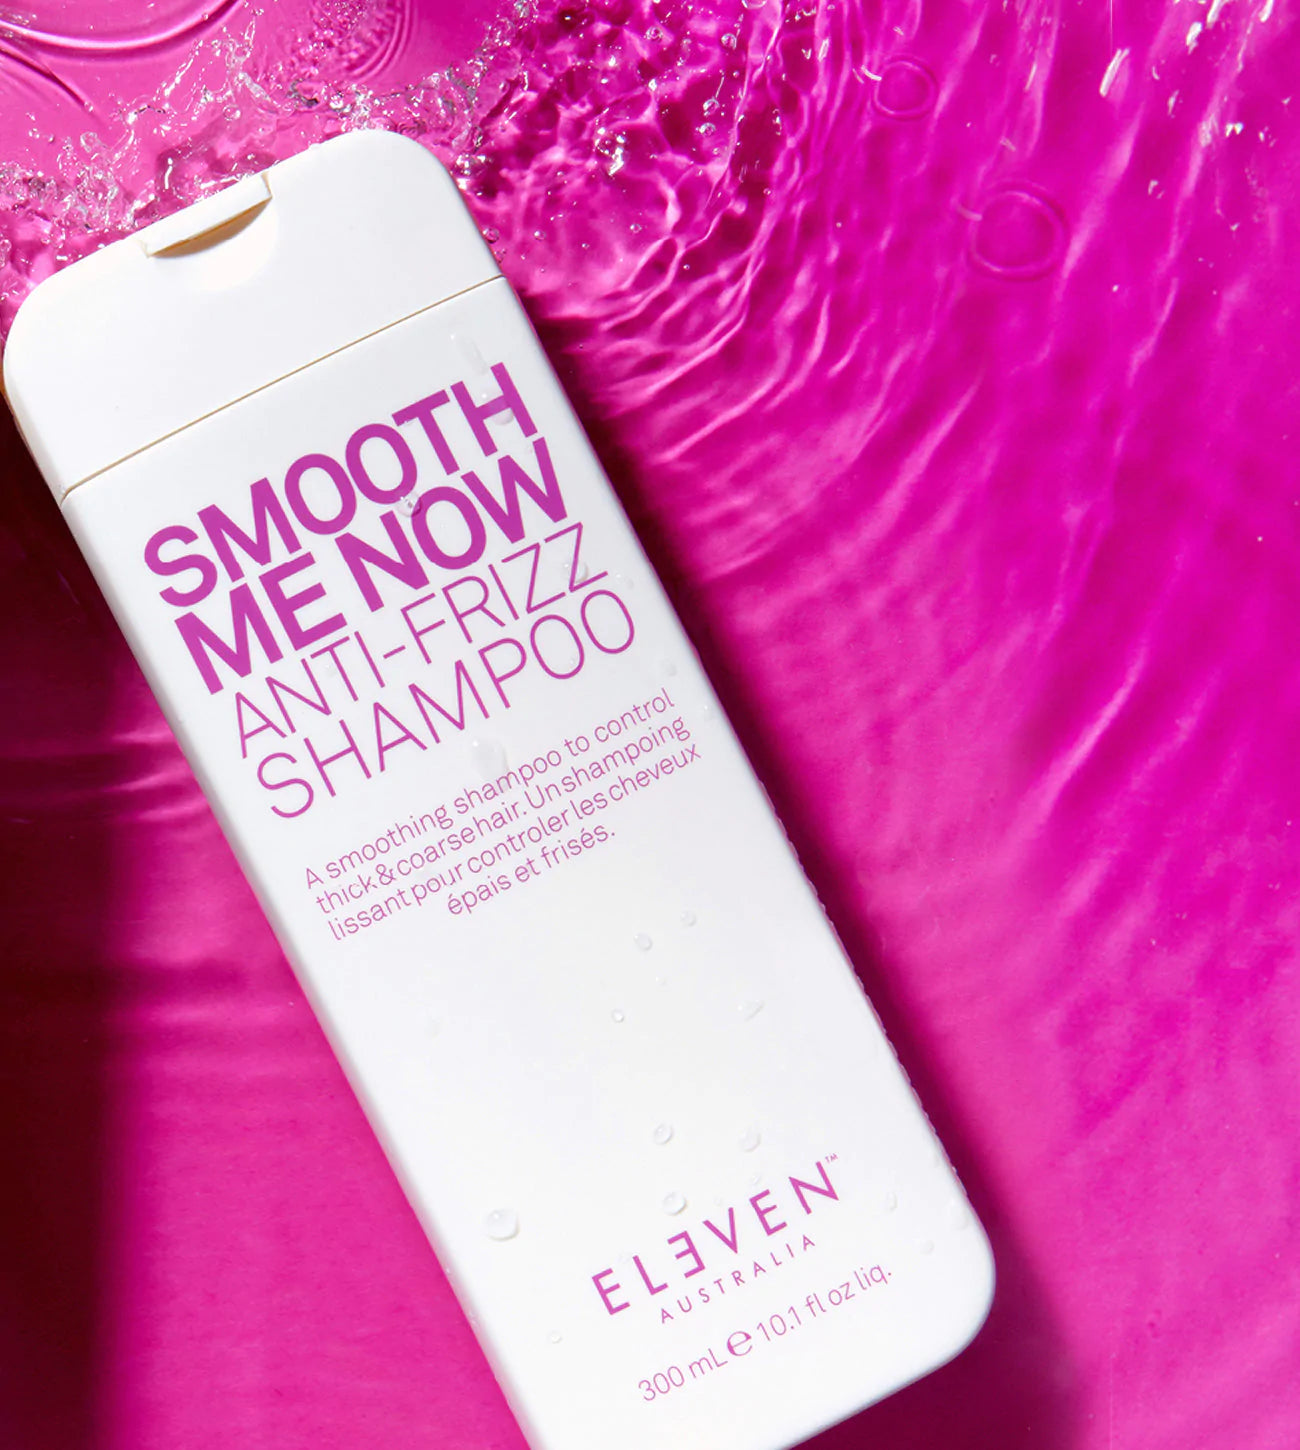 Eleven Smooth Me Now Anti-Frizz Conditioner